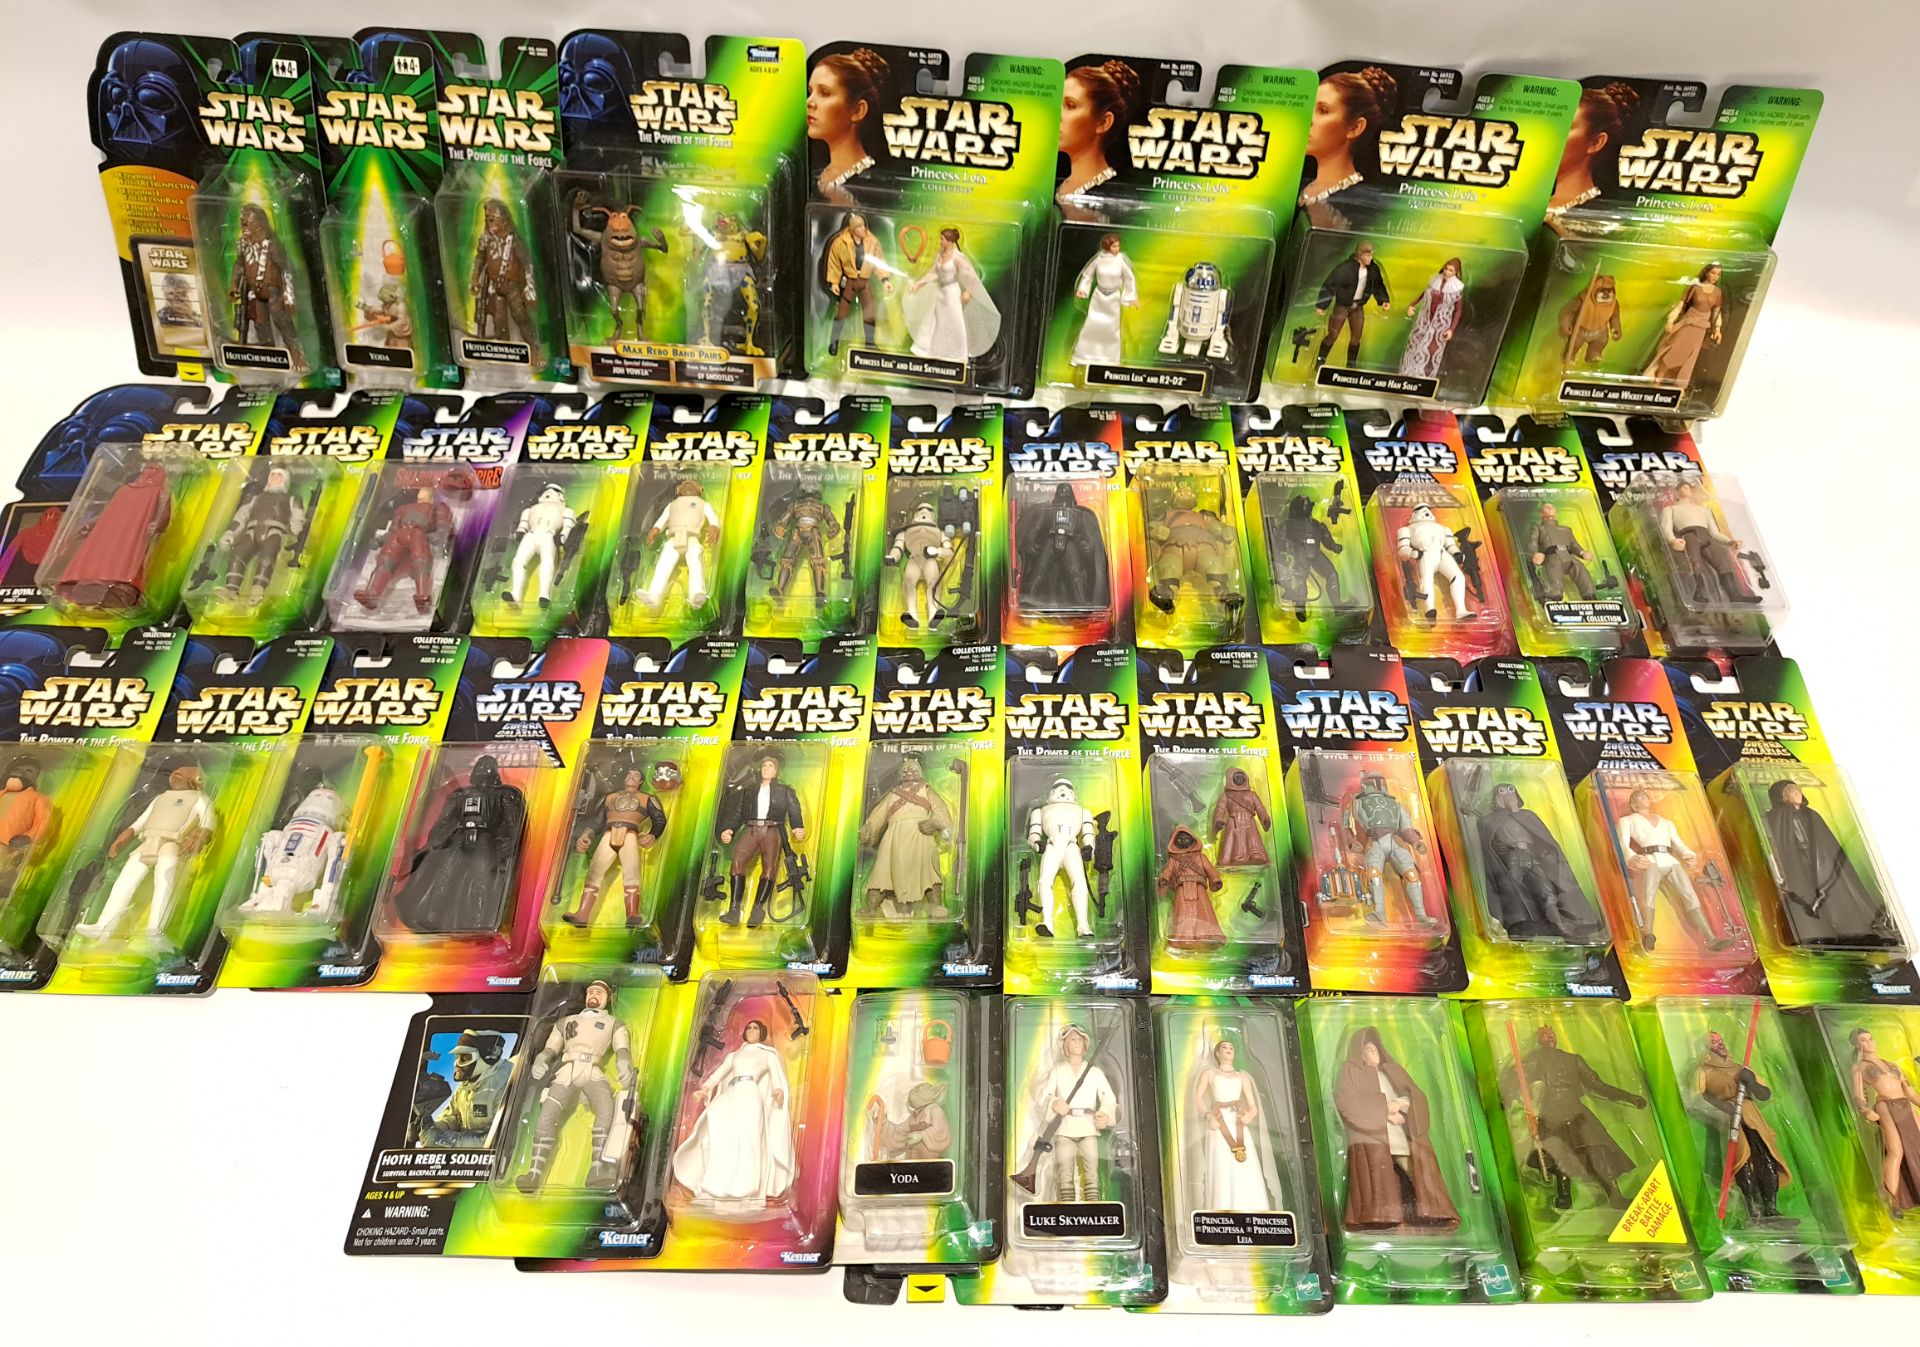 Quantity of Star Wars Carded Action Figures